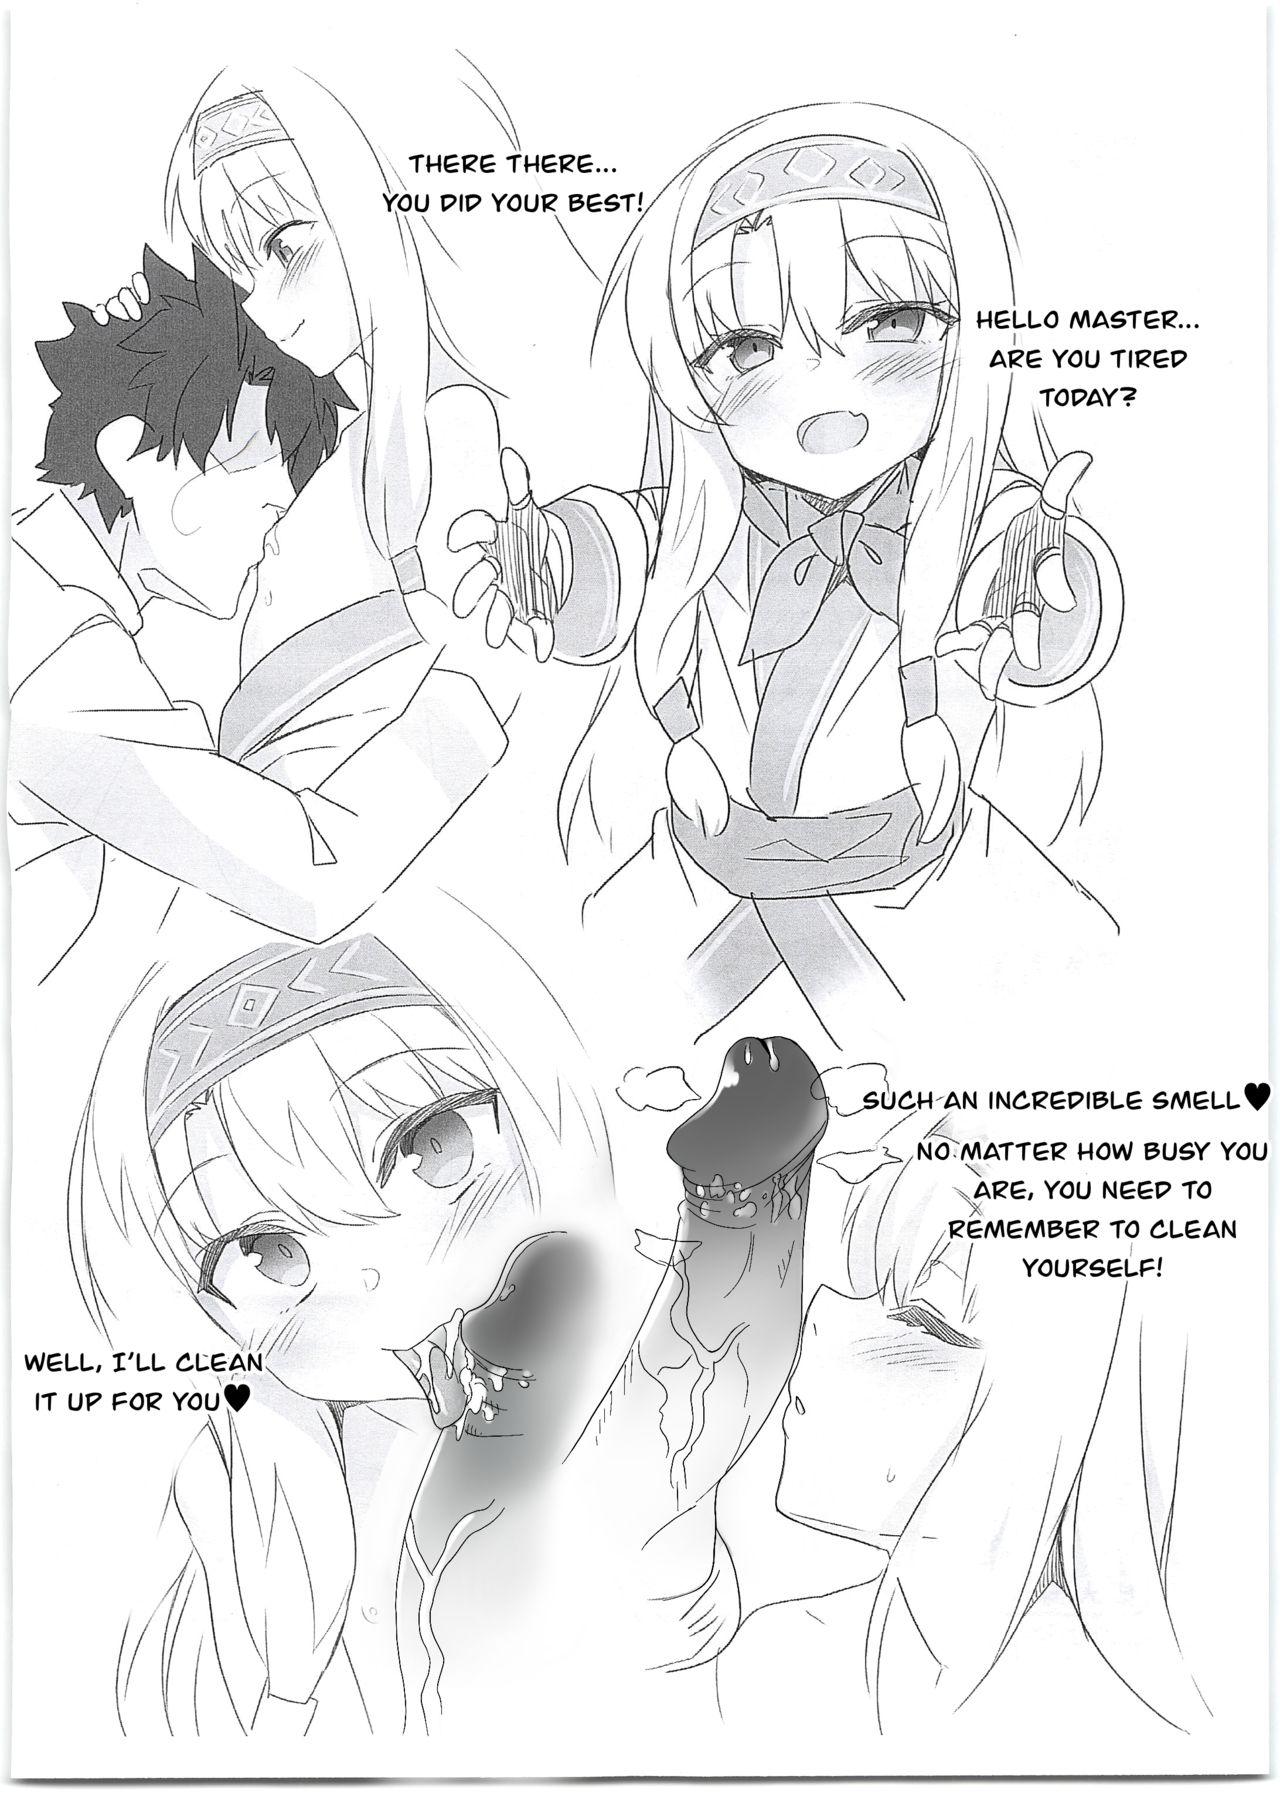 Humiliation Kaijou Gentei Omakebon Pit In 03 - Fate grand order Anal - Page 2